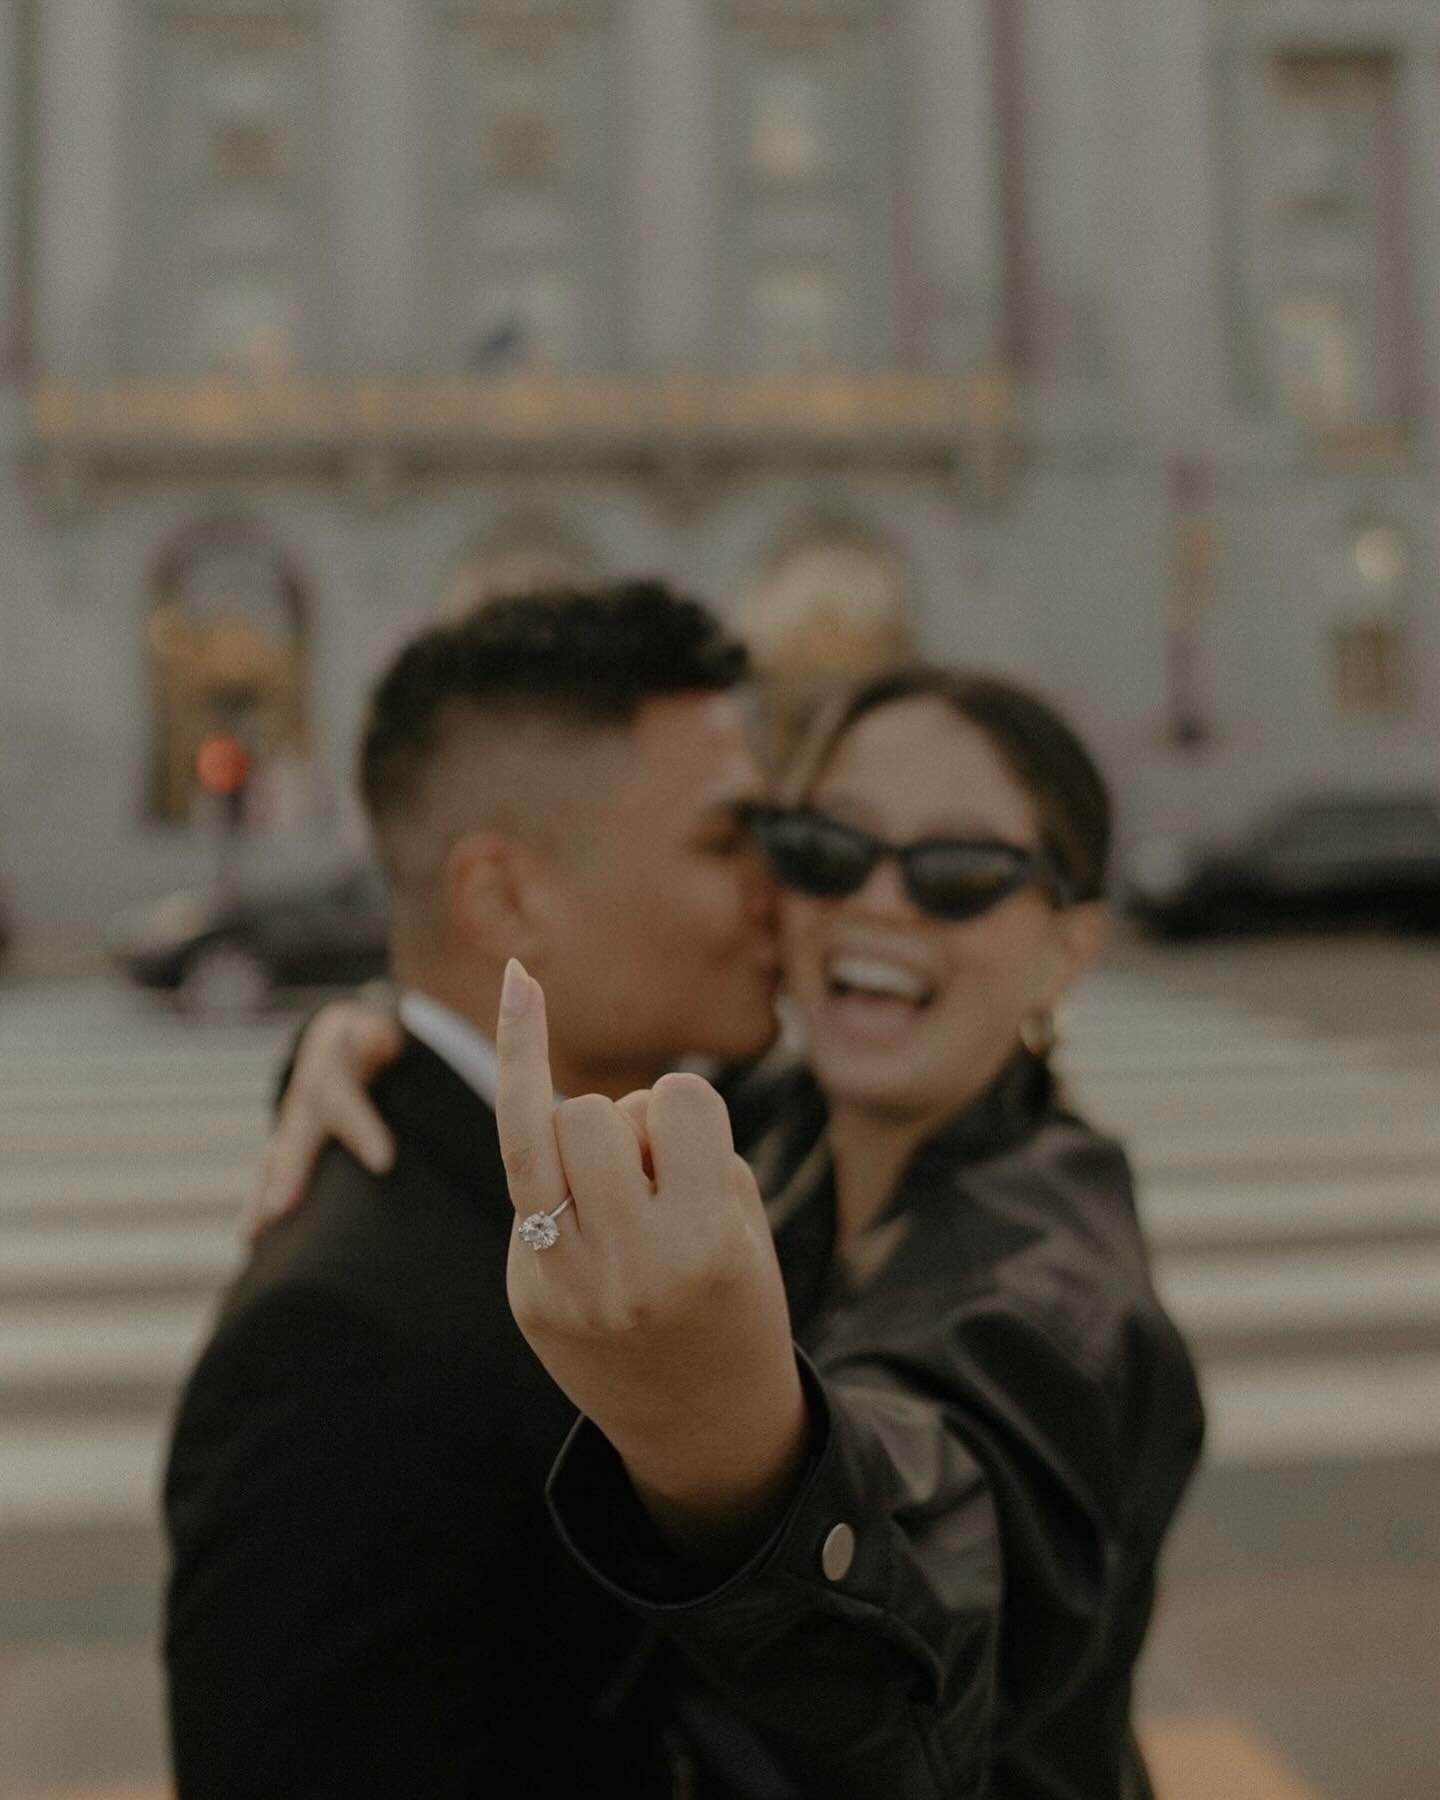 those just married feelings,
 are the real deal ✨💍
.
.
.
.

#minraephoto #sf #sanfrancisco #sfcityhall #sfphotographer #bayareaphotographer #instantfilm #instax #wedding film #oaklandphotographer #sonomaphotographer #napaphotographer #elopementphoto